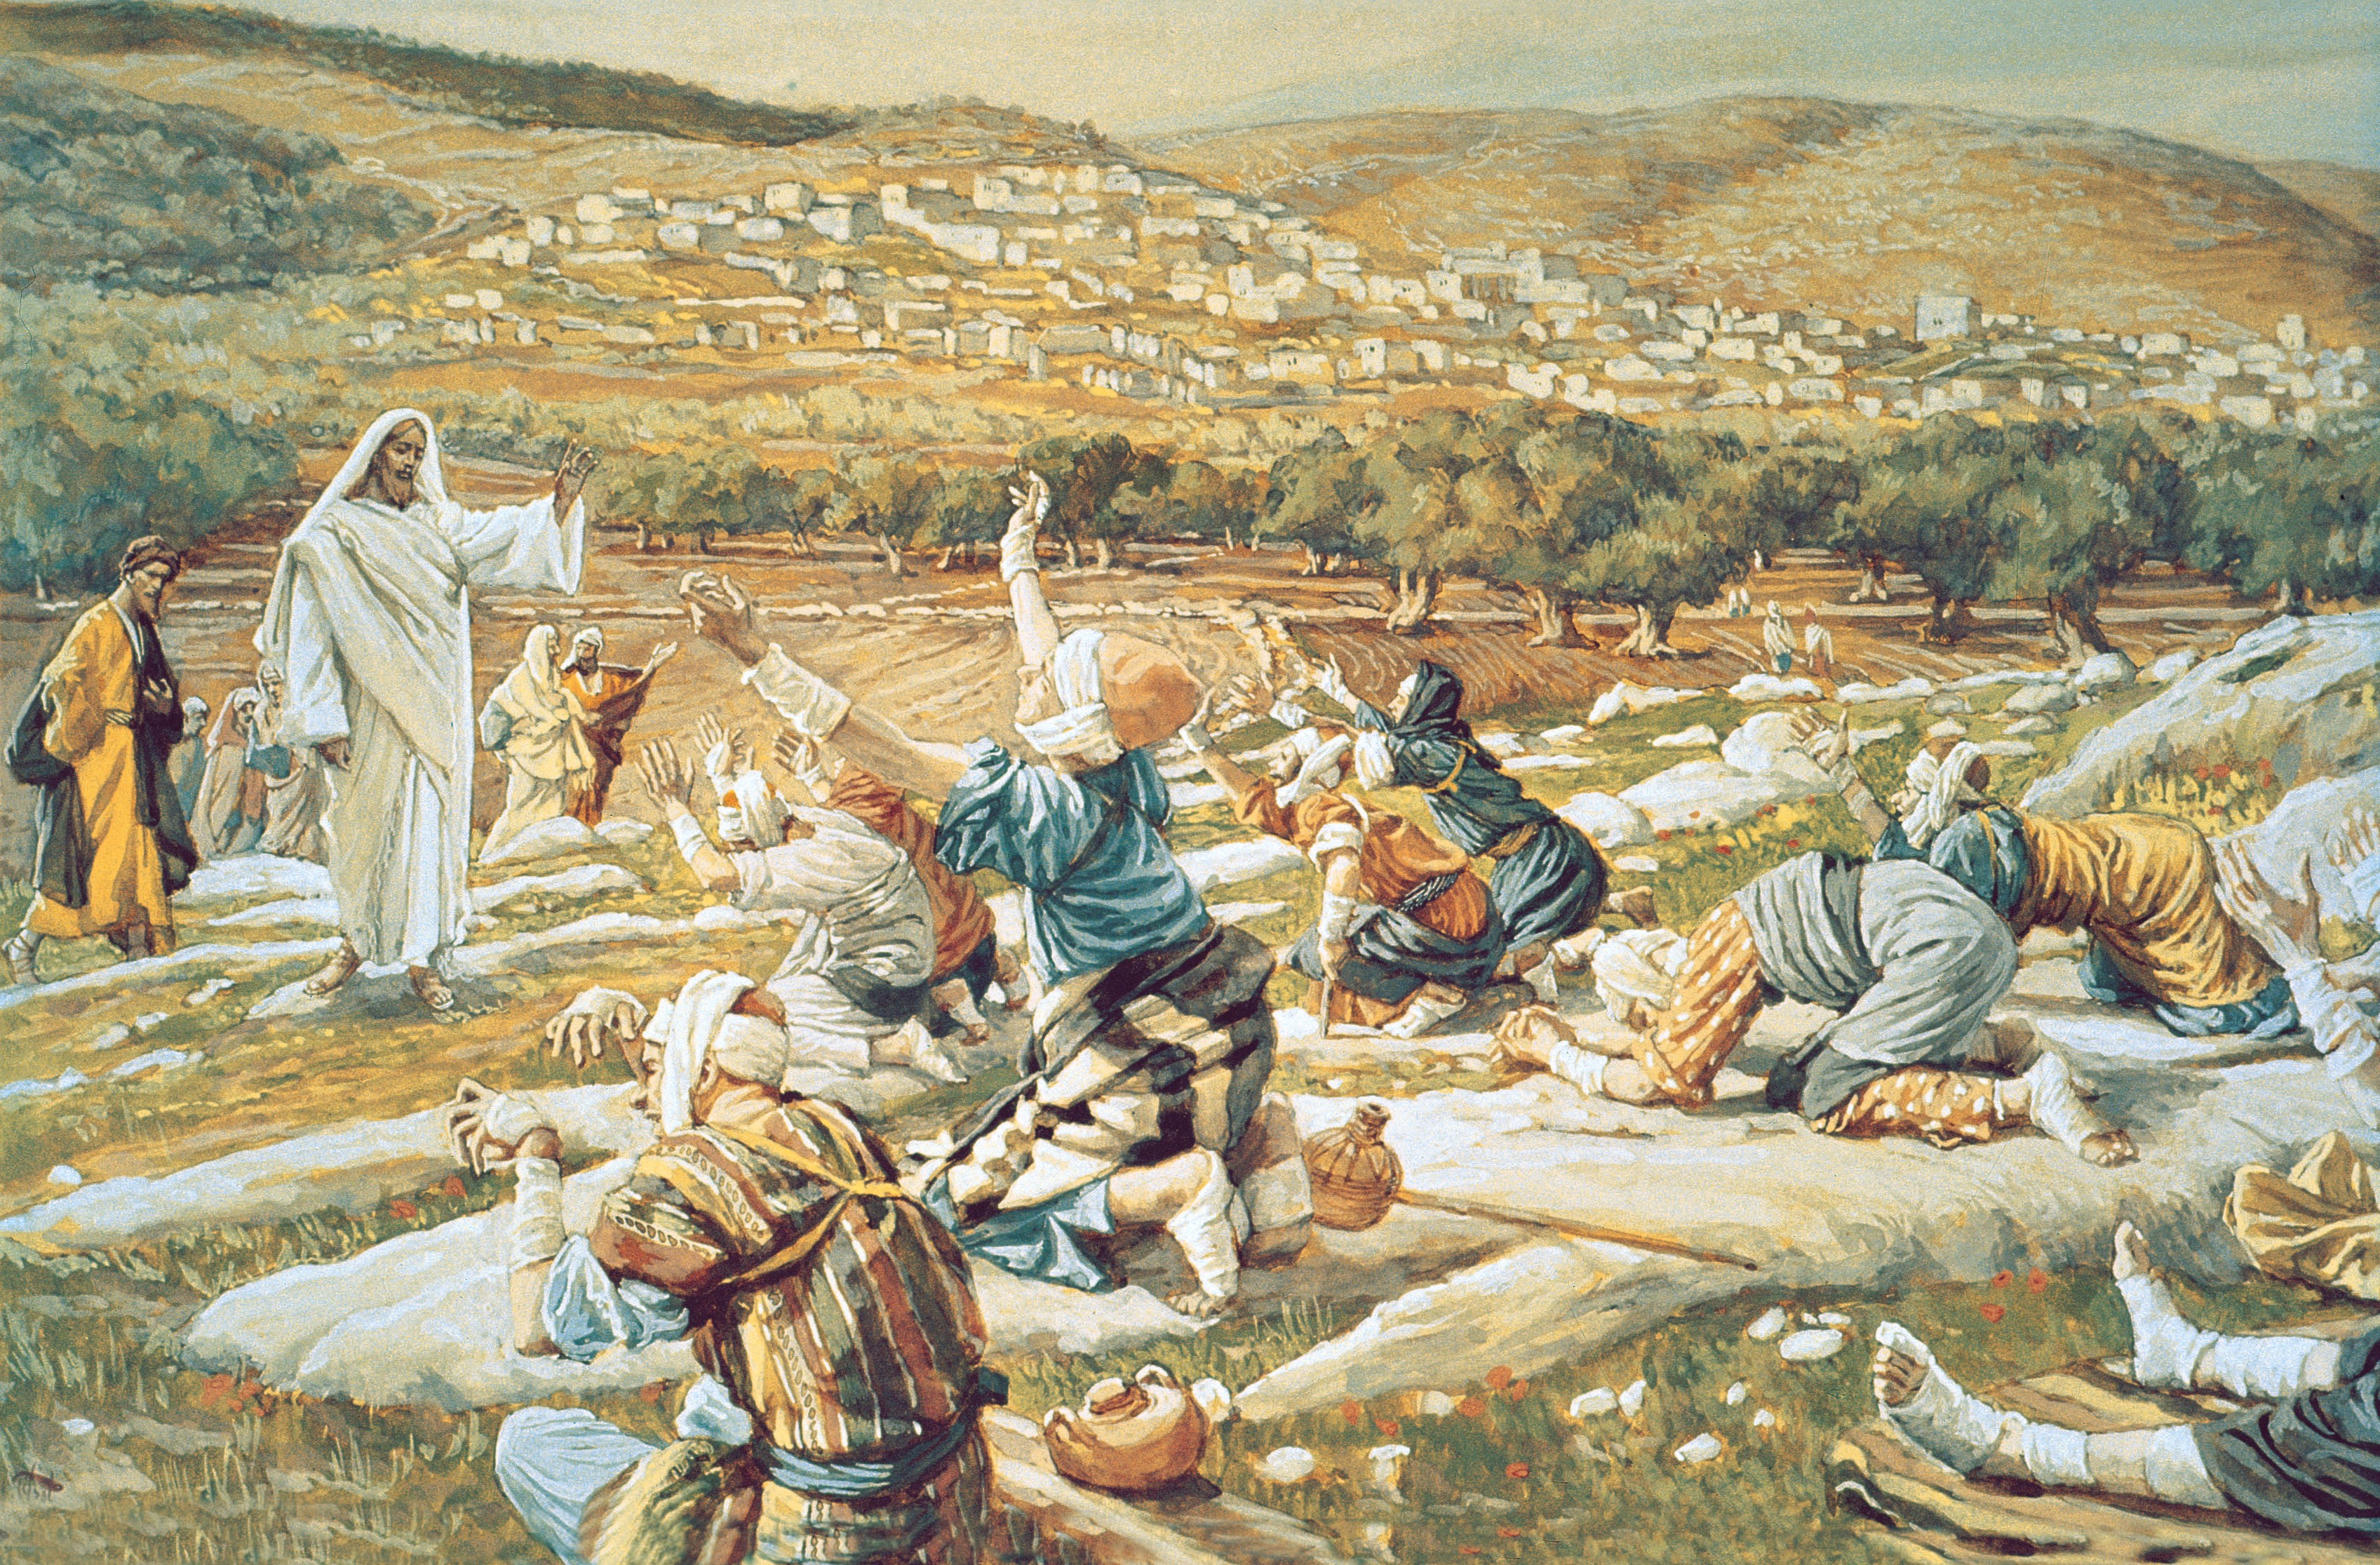 A painting by James Tissot showing Christ approaching a group of 10 lepers, who are kneeling on the ground, begging for assistance.